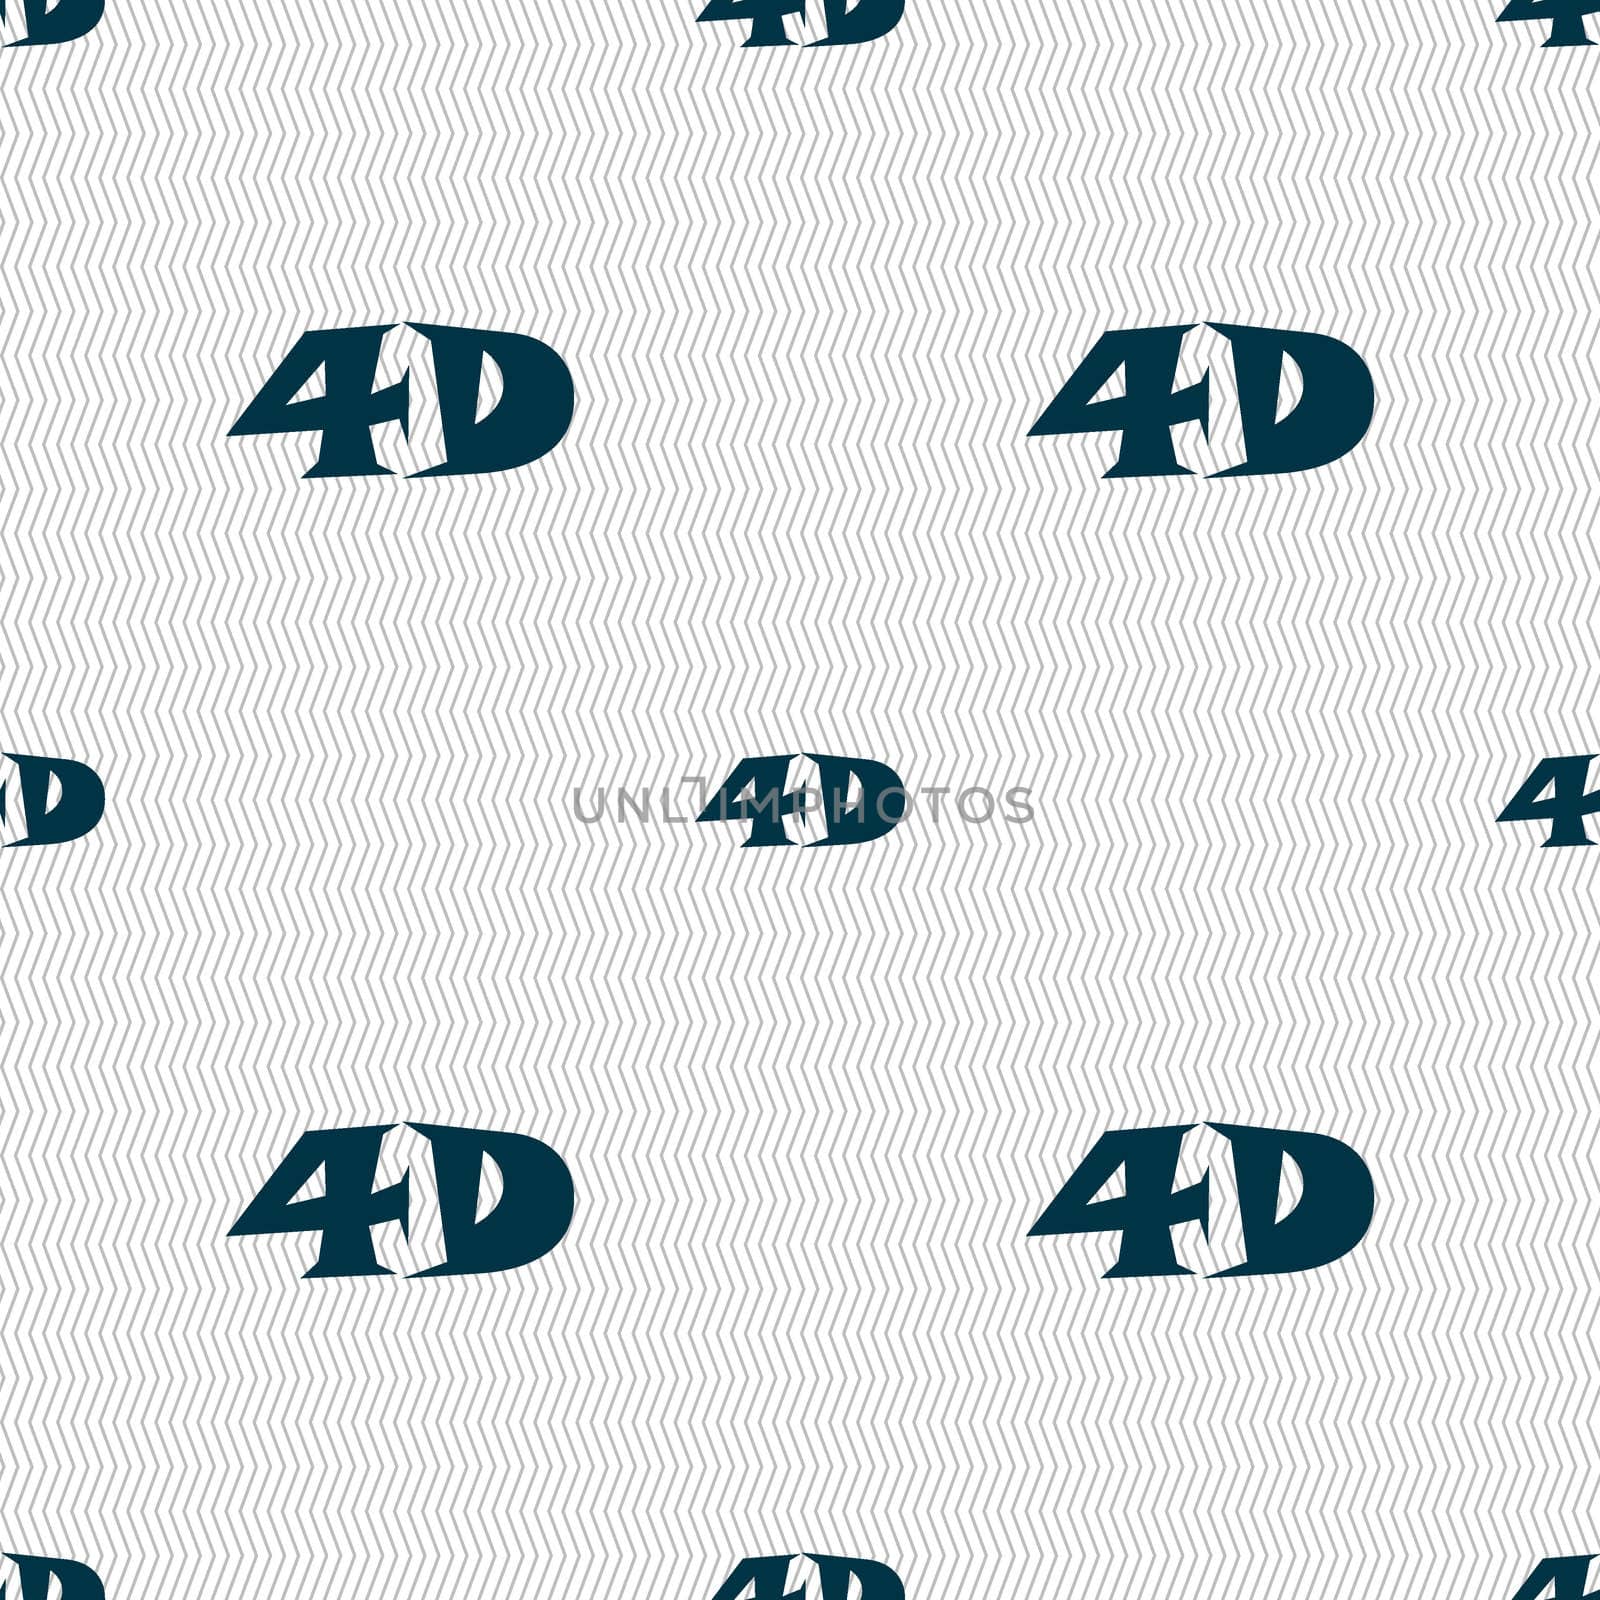 4D sign icon. 4D New technology symbol. Seamless abstract background with geometric shapes. illustration